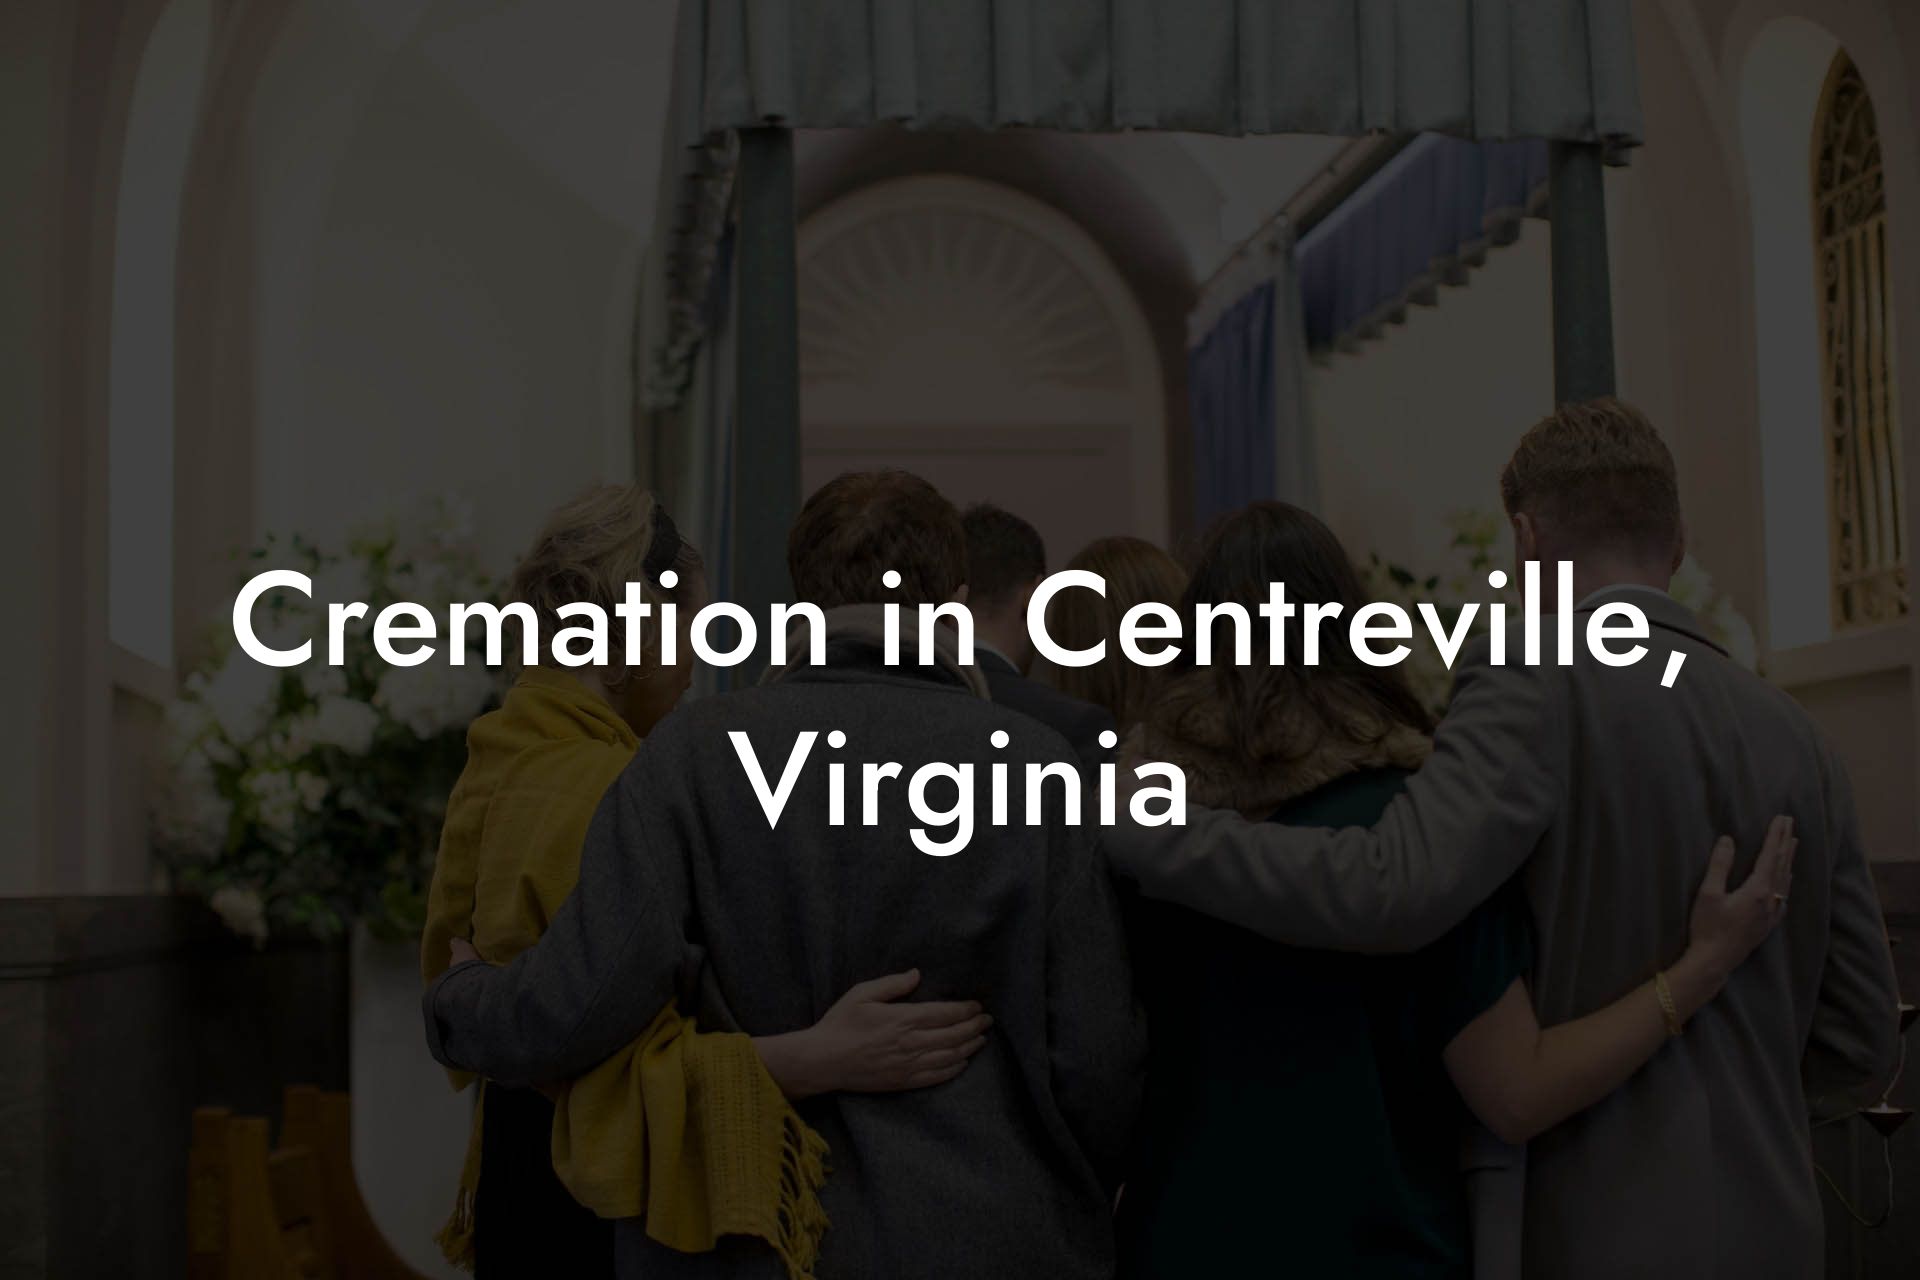 Cremation in Centreville, Virginia